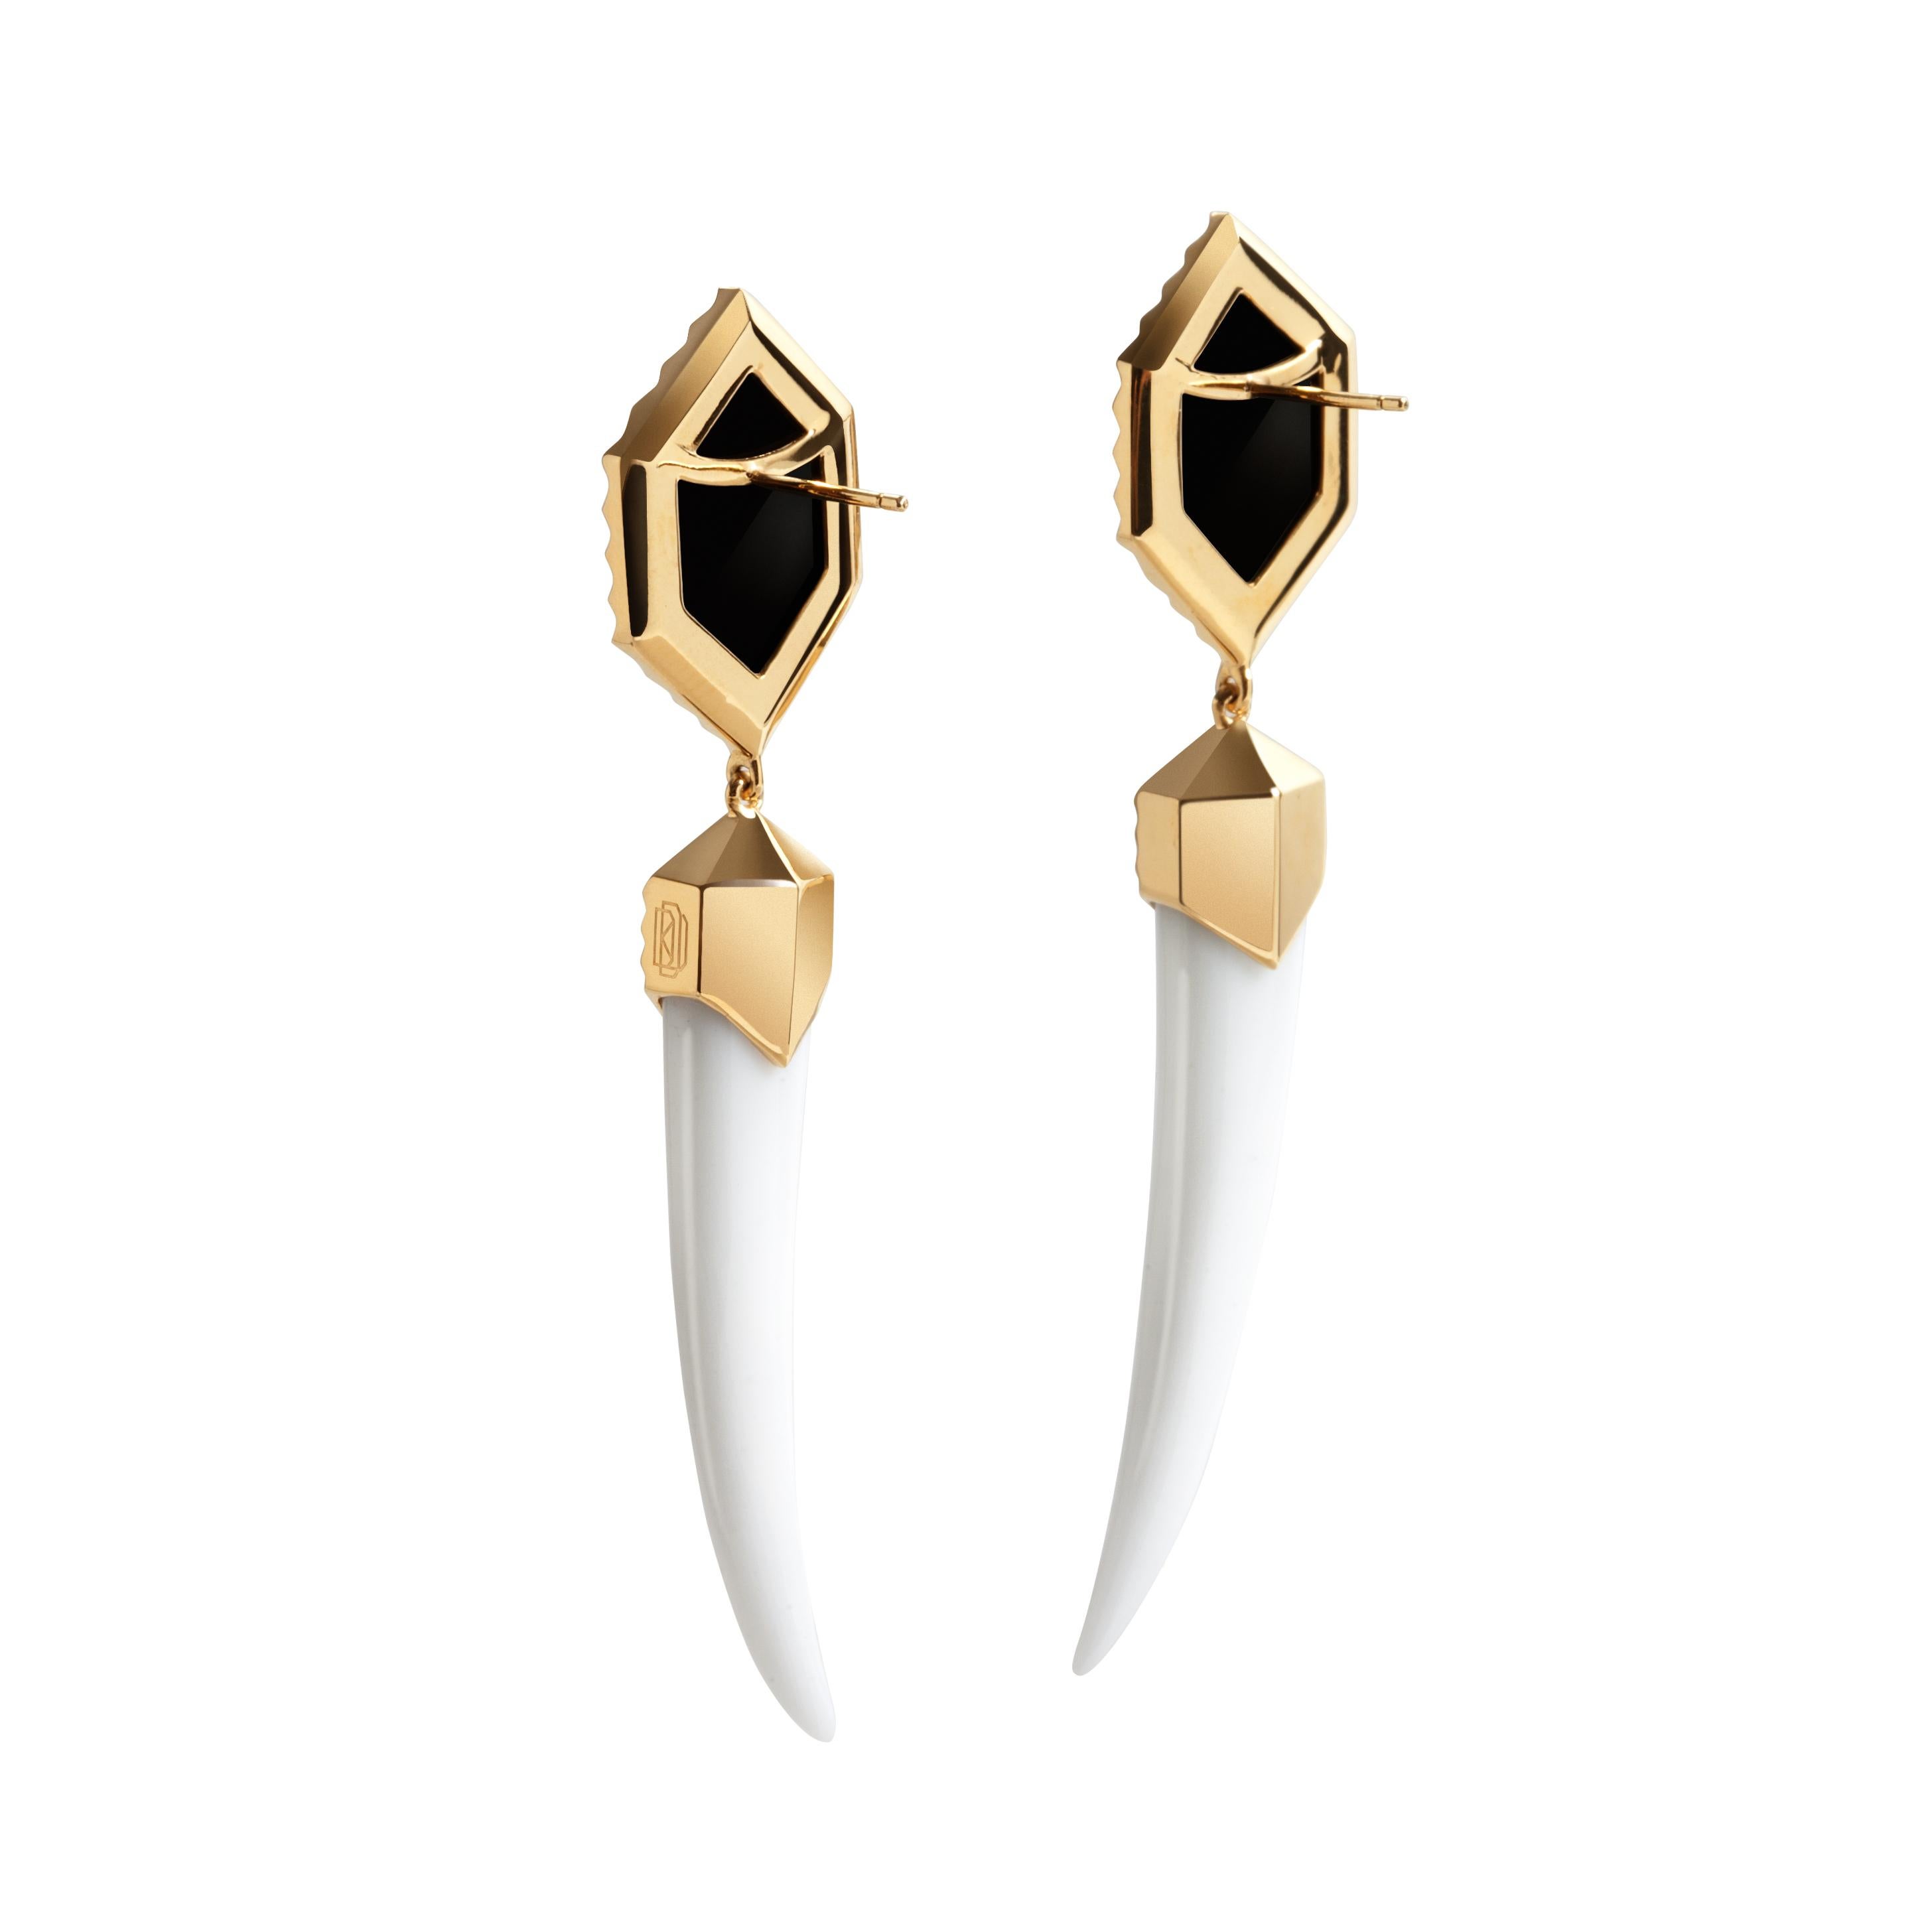 The Alexandria White Agate Horn Earrings by Angie Marei are a luxurious must-have statement piece for the jewelry lover. A powerful sensual design inspired by the art deco period and talismans worn by ancient Egyptians. Exquisitely crafted in